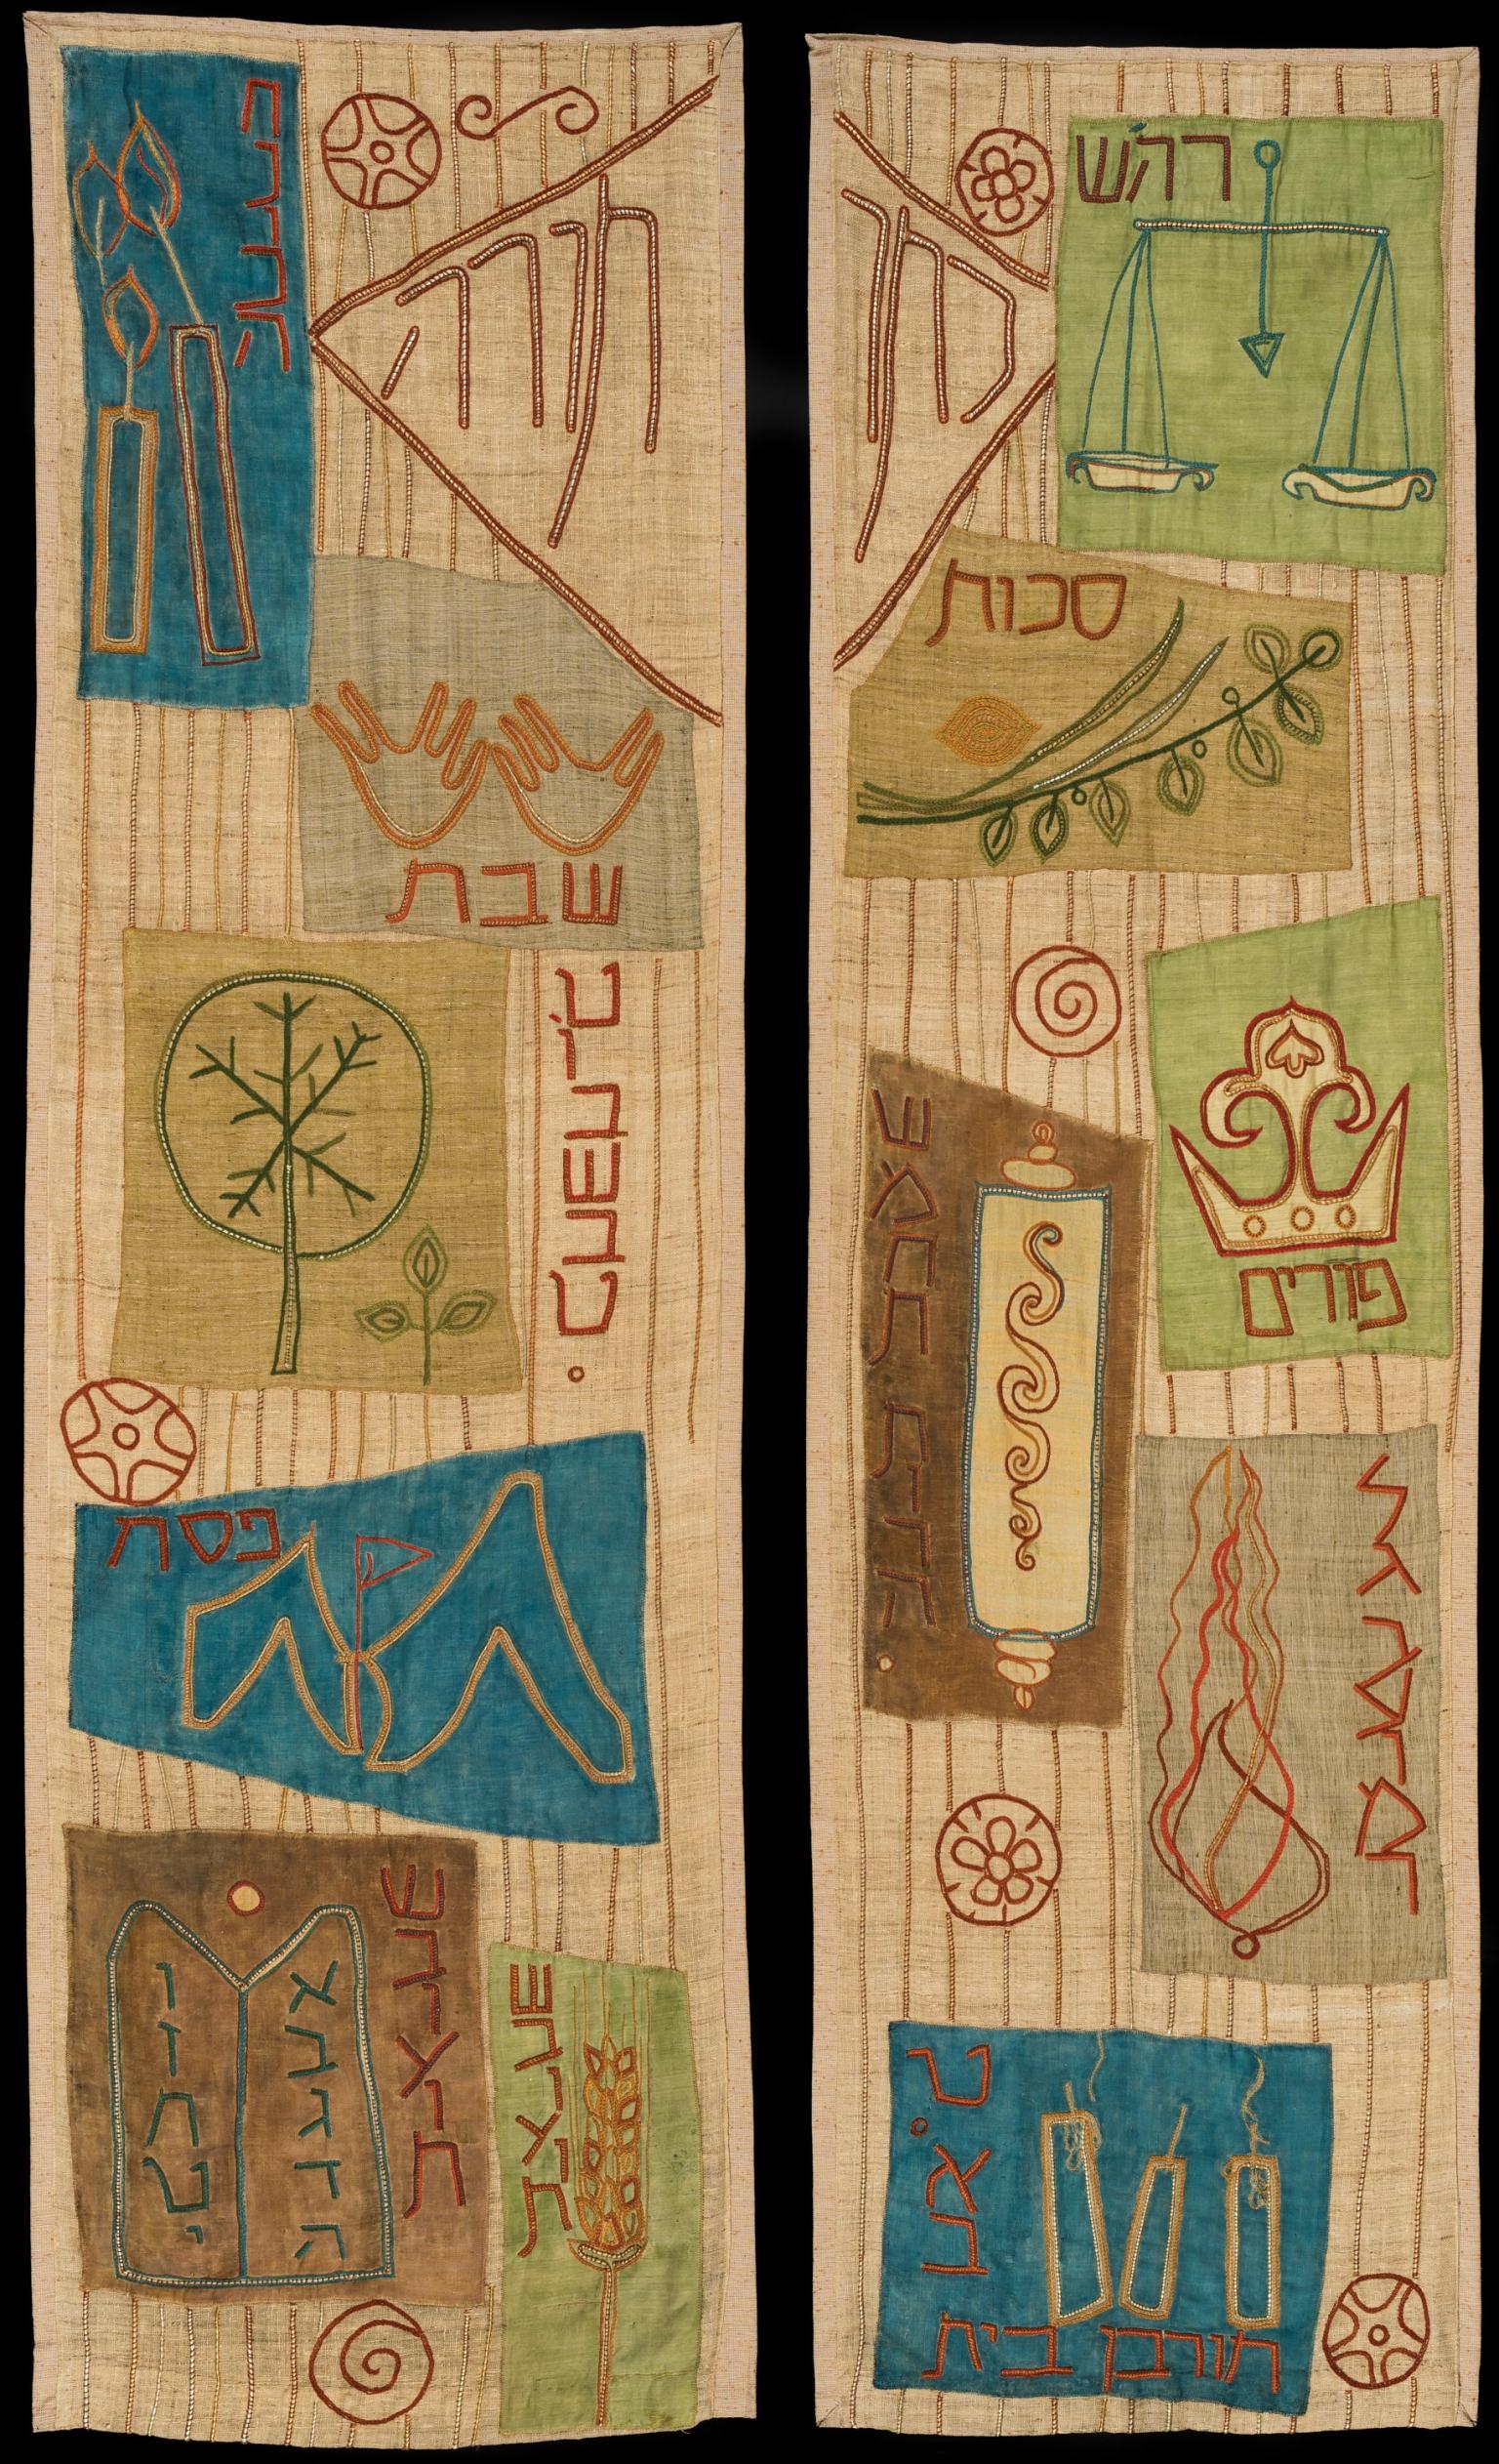 Textile featuring two panels depicting Torah scrolls, Hebrew words, candles, scale, geometric shapes, and floral and plant motifs.